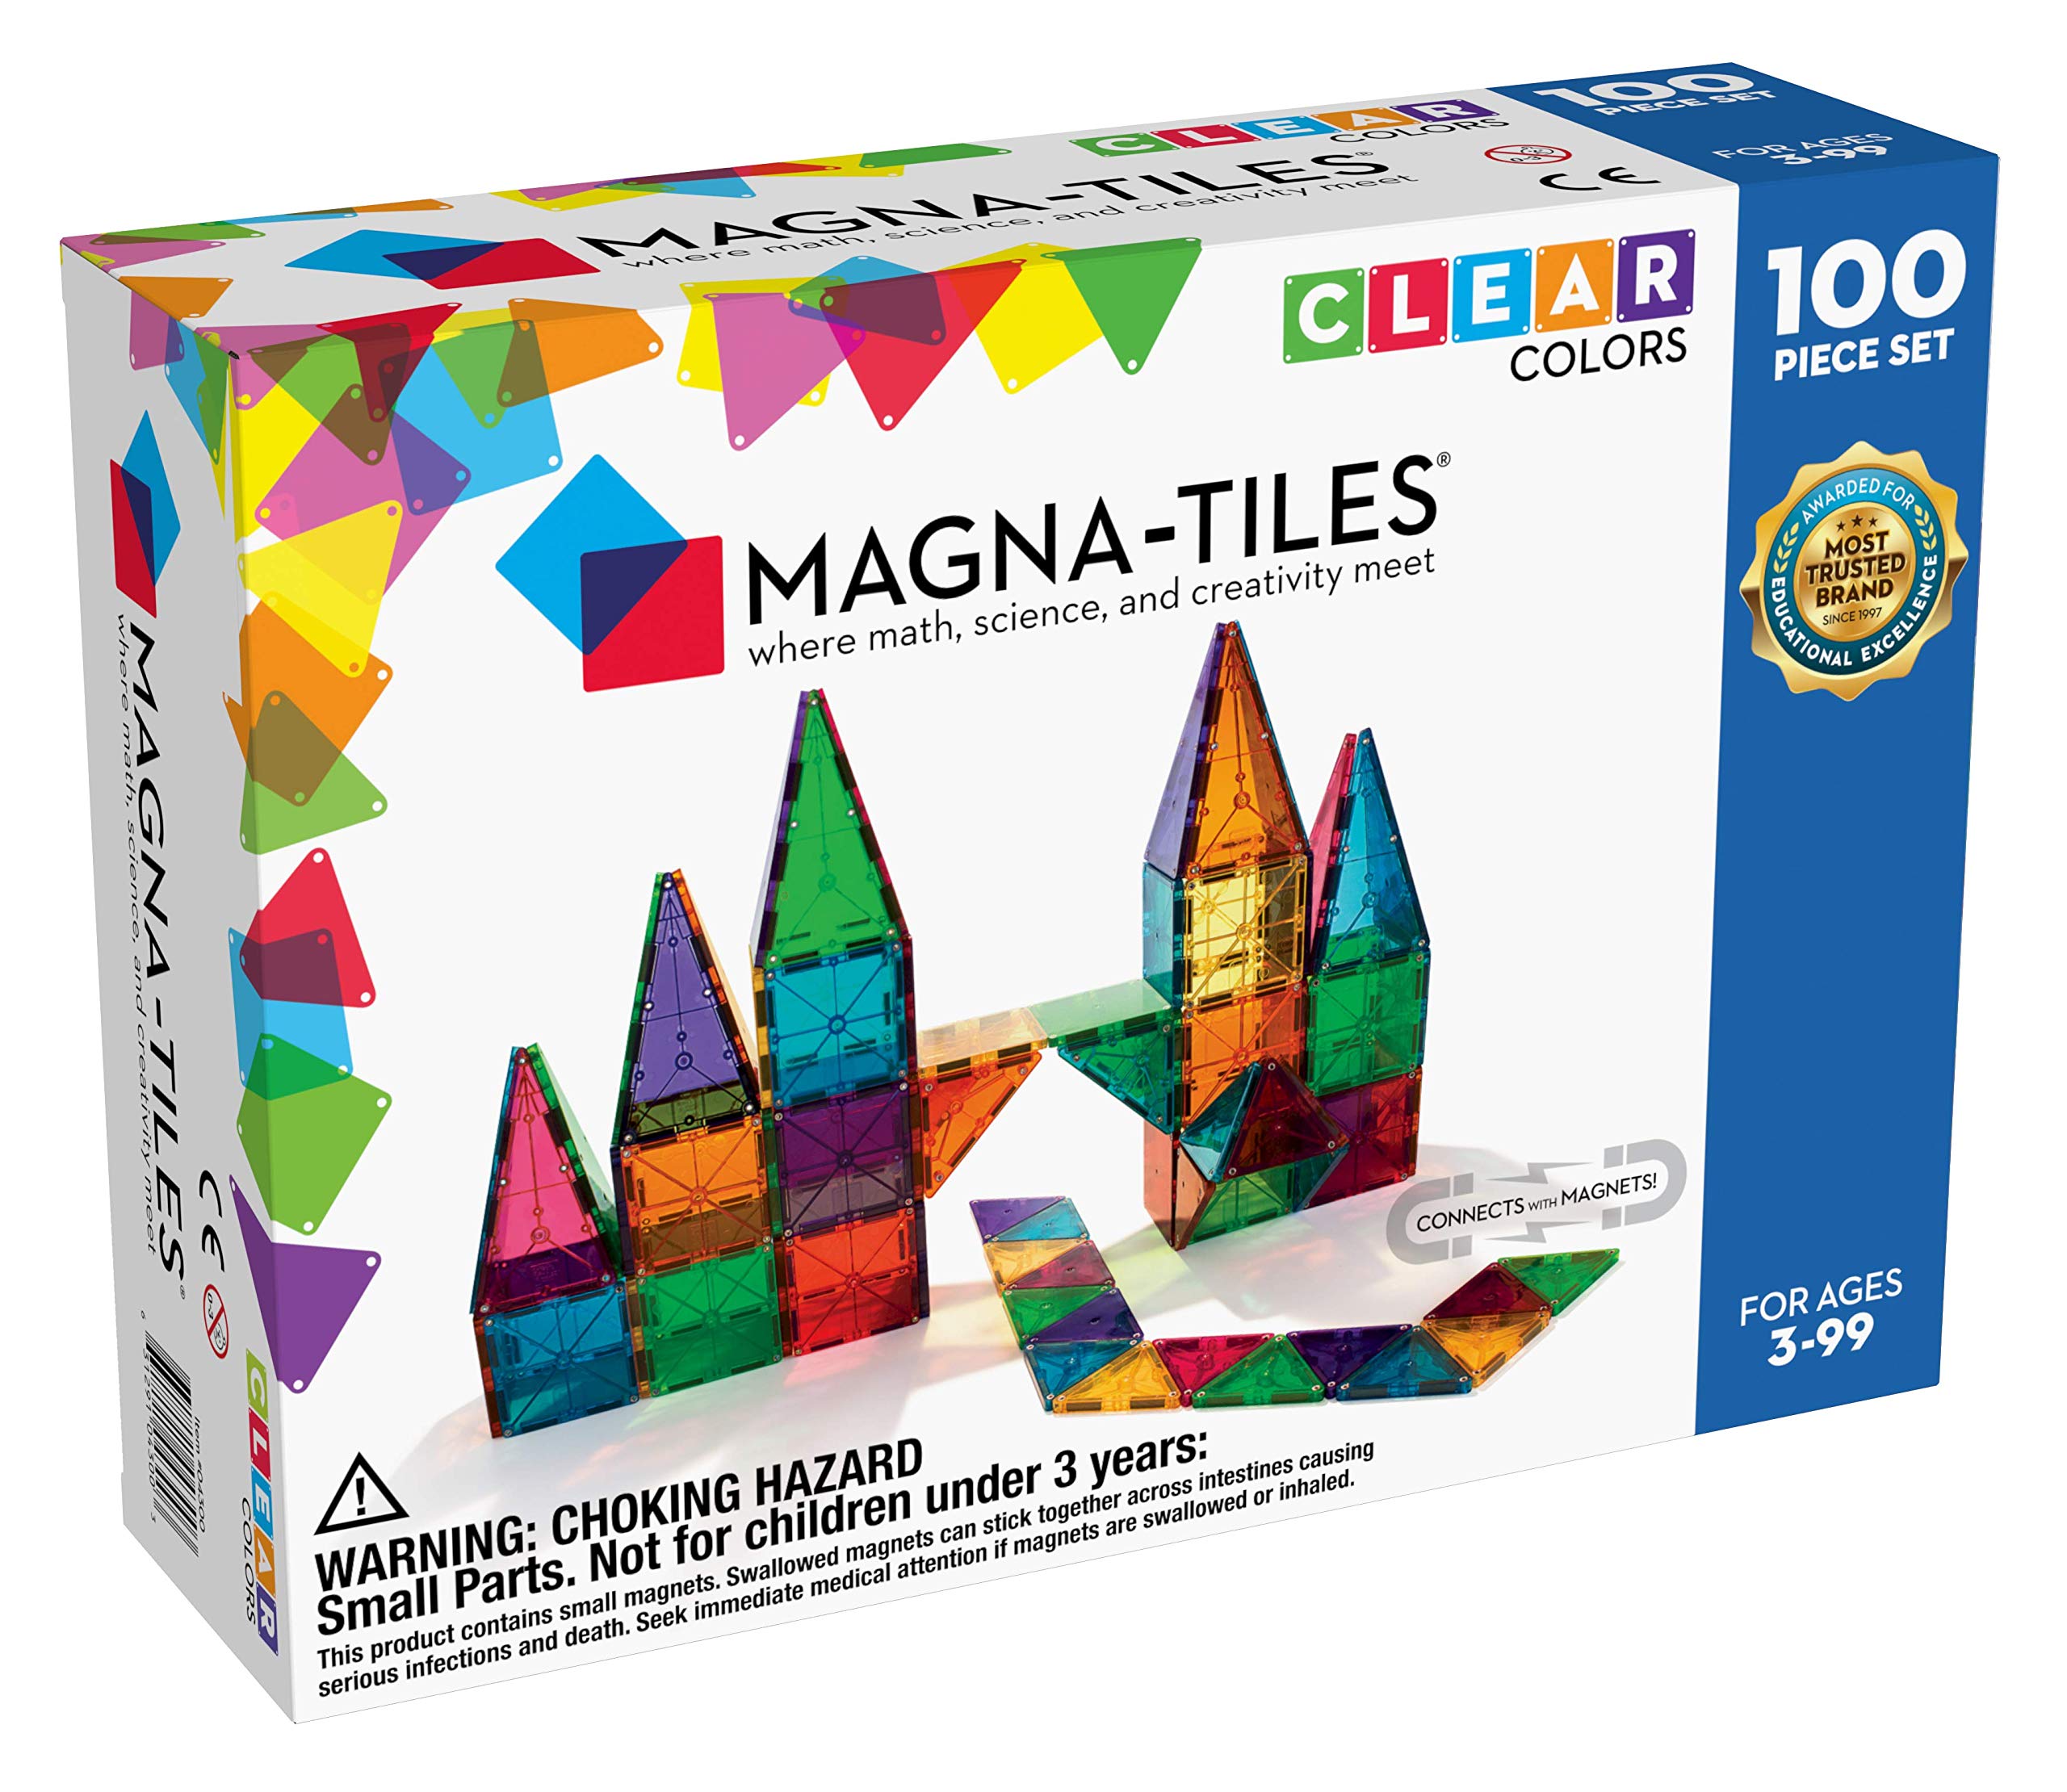 Magna Tiles Magna-Tiles 100-Piece Clear Colors Set, The Original Magnetic Building Tiles For Creative Open-Ended Play, Educational Toys For Children Ages 3 Years +